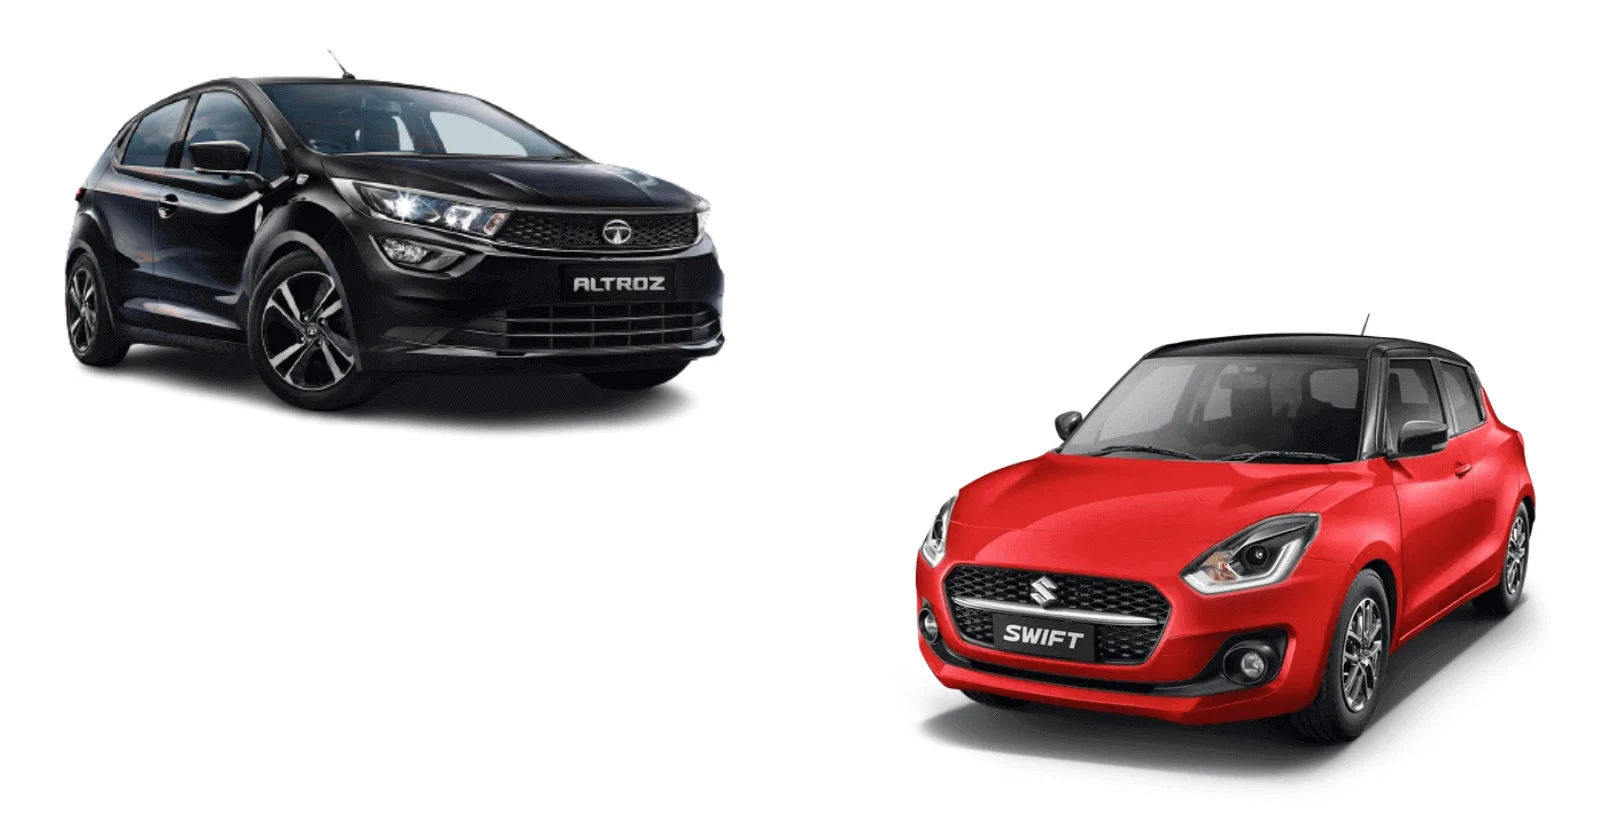 Swift vs Altroz: Compare Prices, Mileage and Specifications (2023)